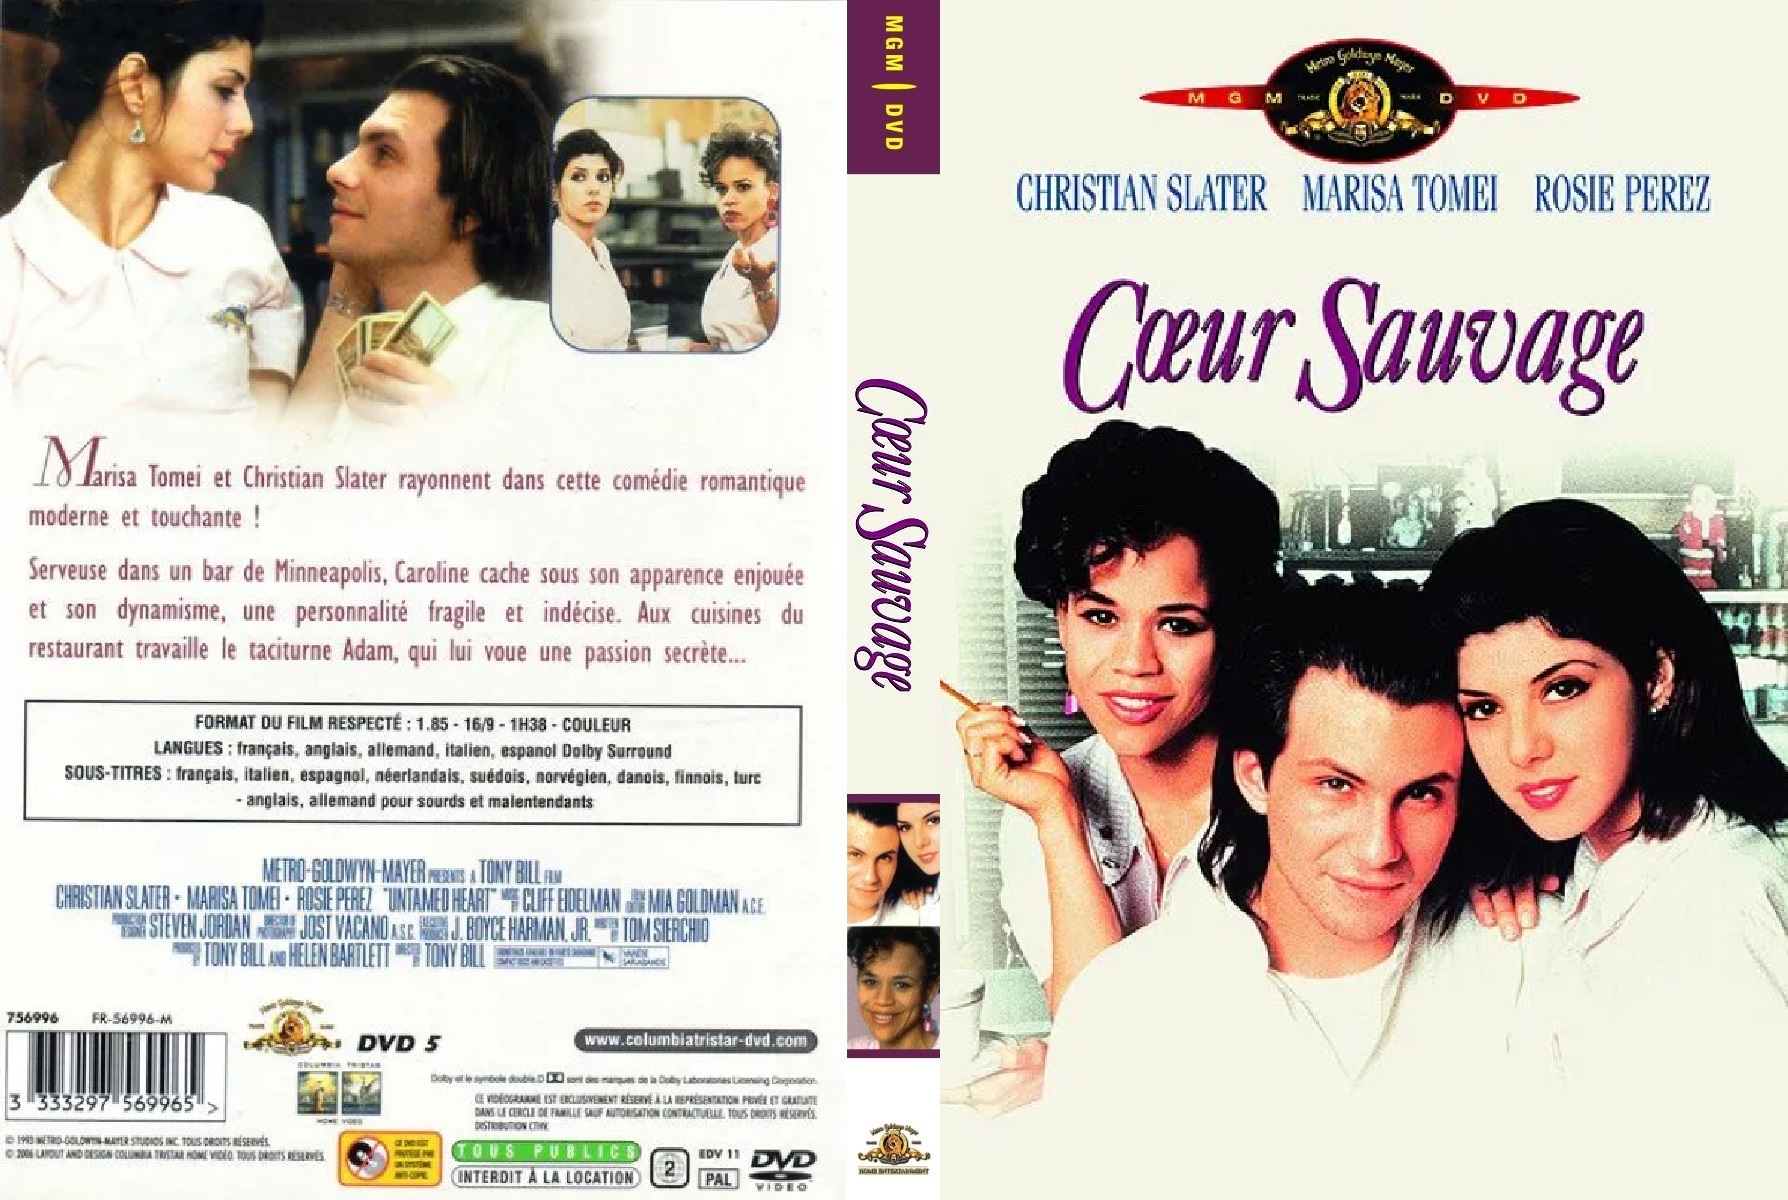 Jaquette DVD Coeur Sauvage